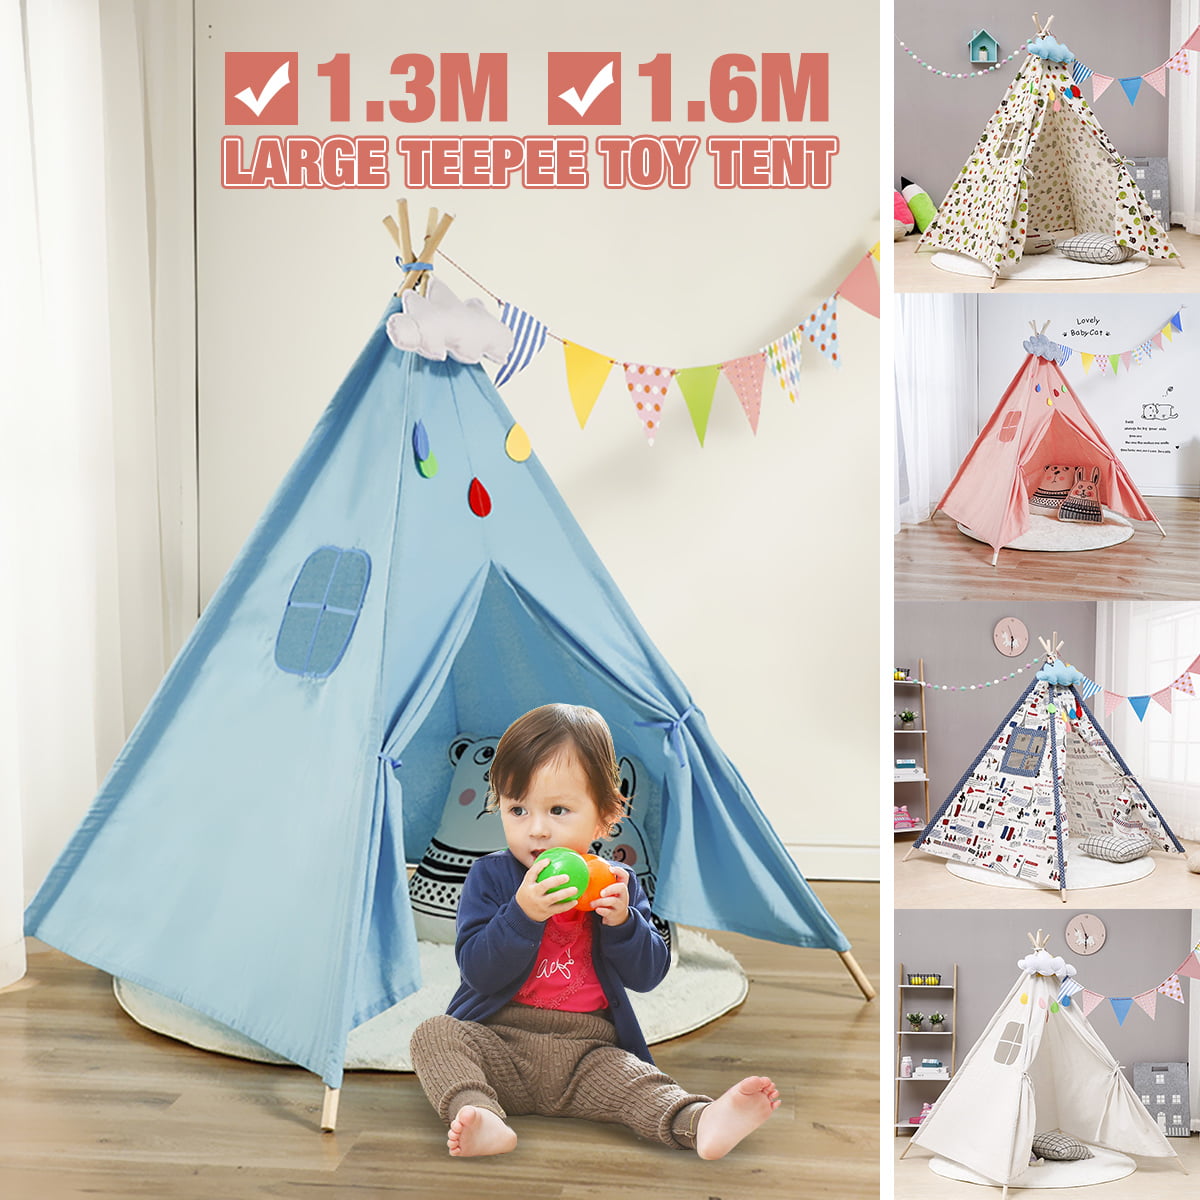 Indoor Outdoor Cotton Canvas Indian Play Tent Princess Castle Children Play House Sleeping Dome Birthday Gift Pink Teepee Tents for Kids